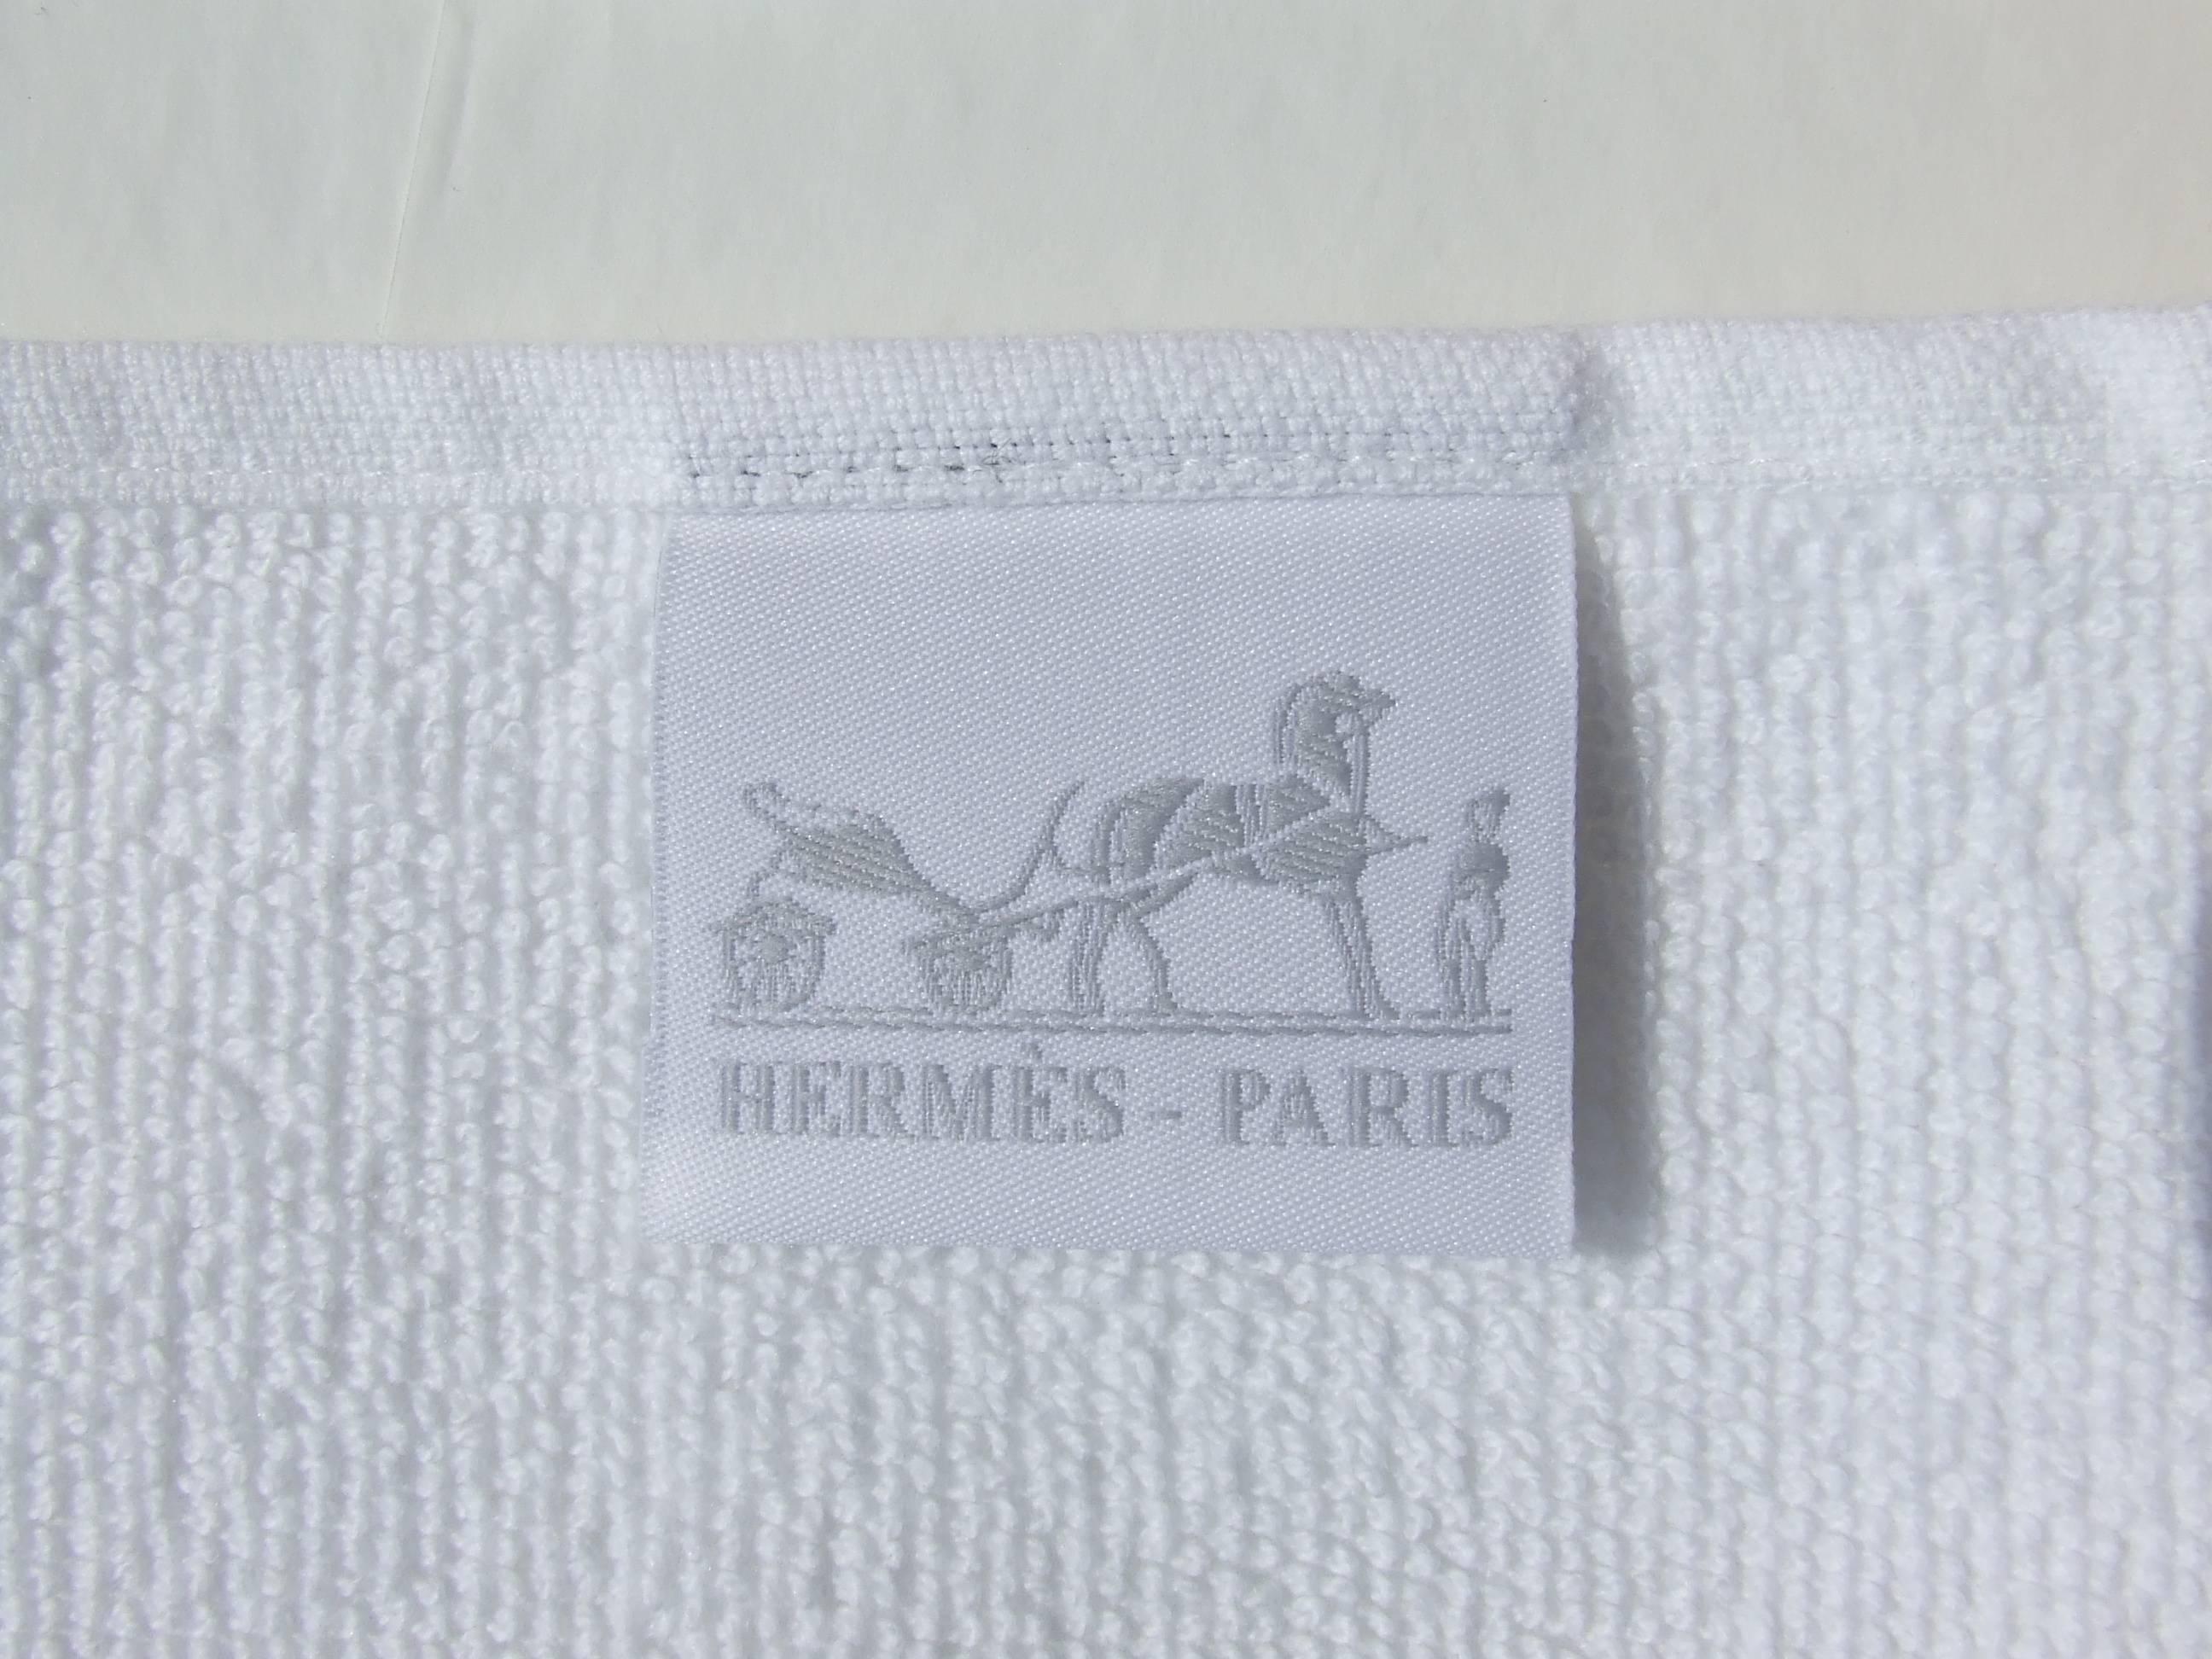 Hermès Set of Sports Towel and Sweatband Tennis Combed Cotton For Woman NIB 5